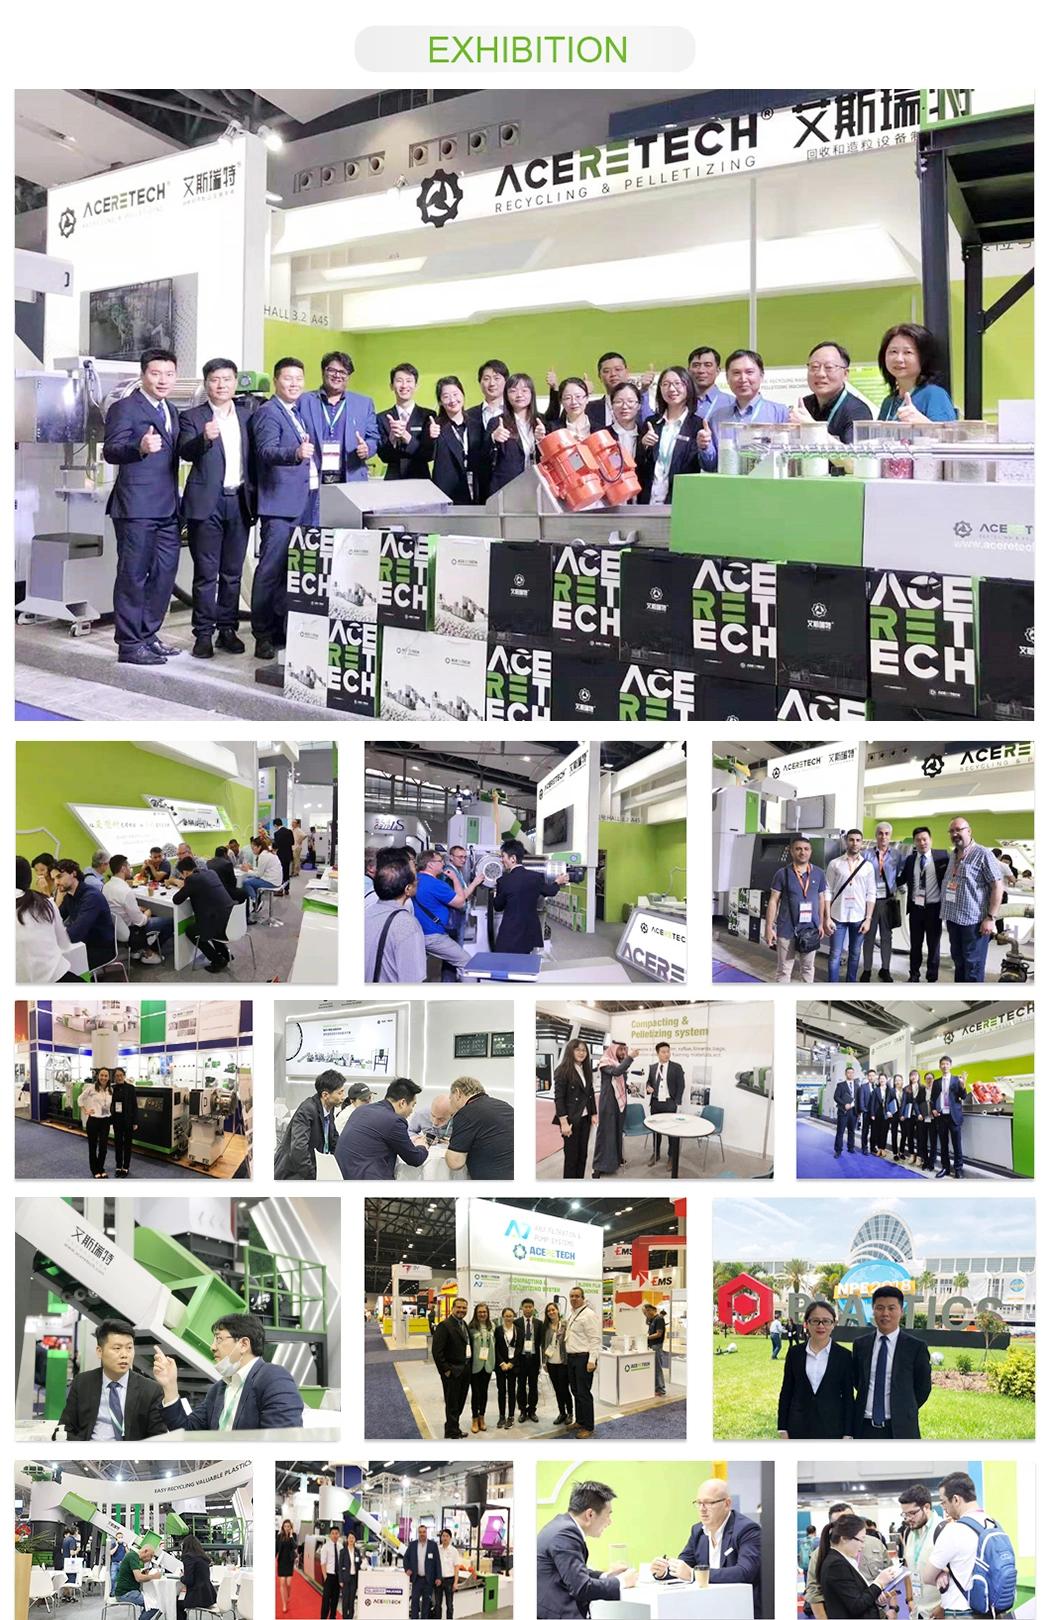 Aceretech Energy Saving Electronic Waste Recycling Machinery